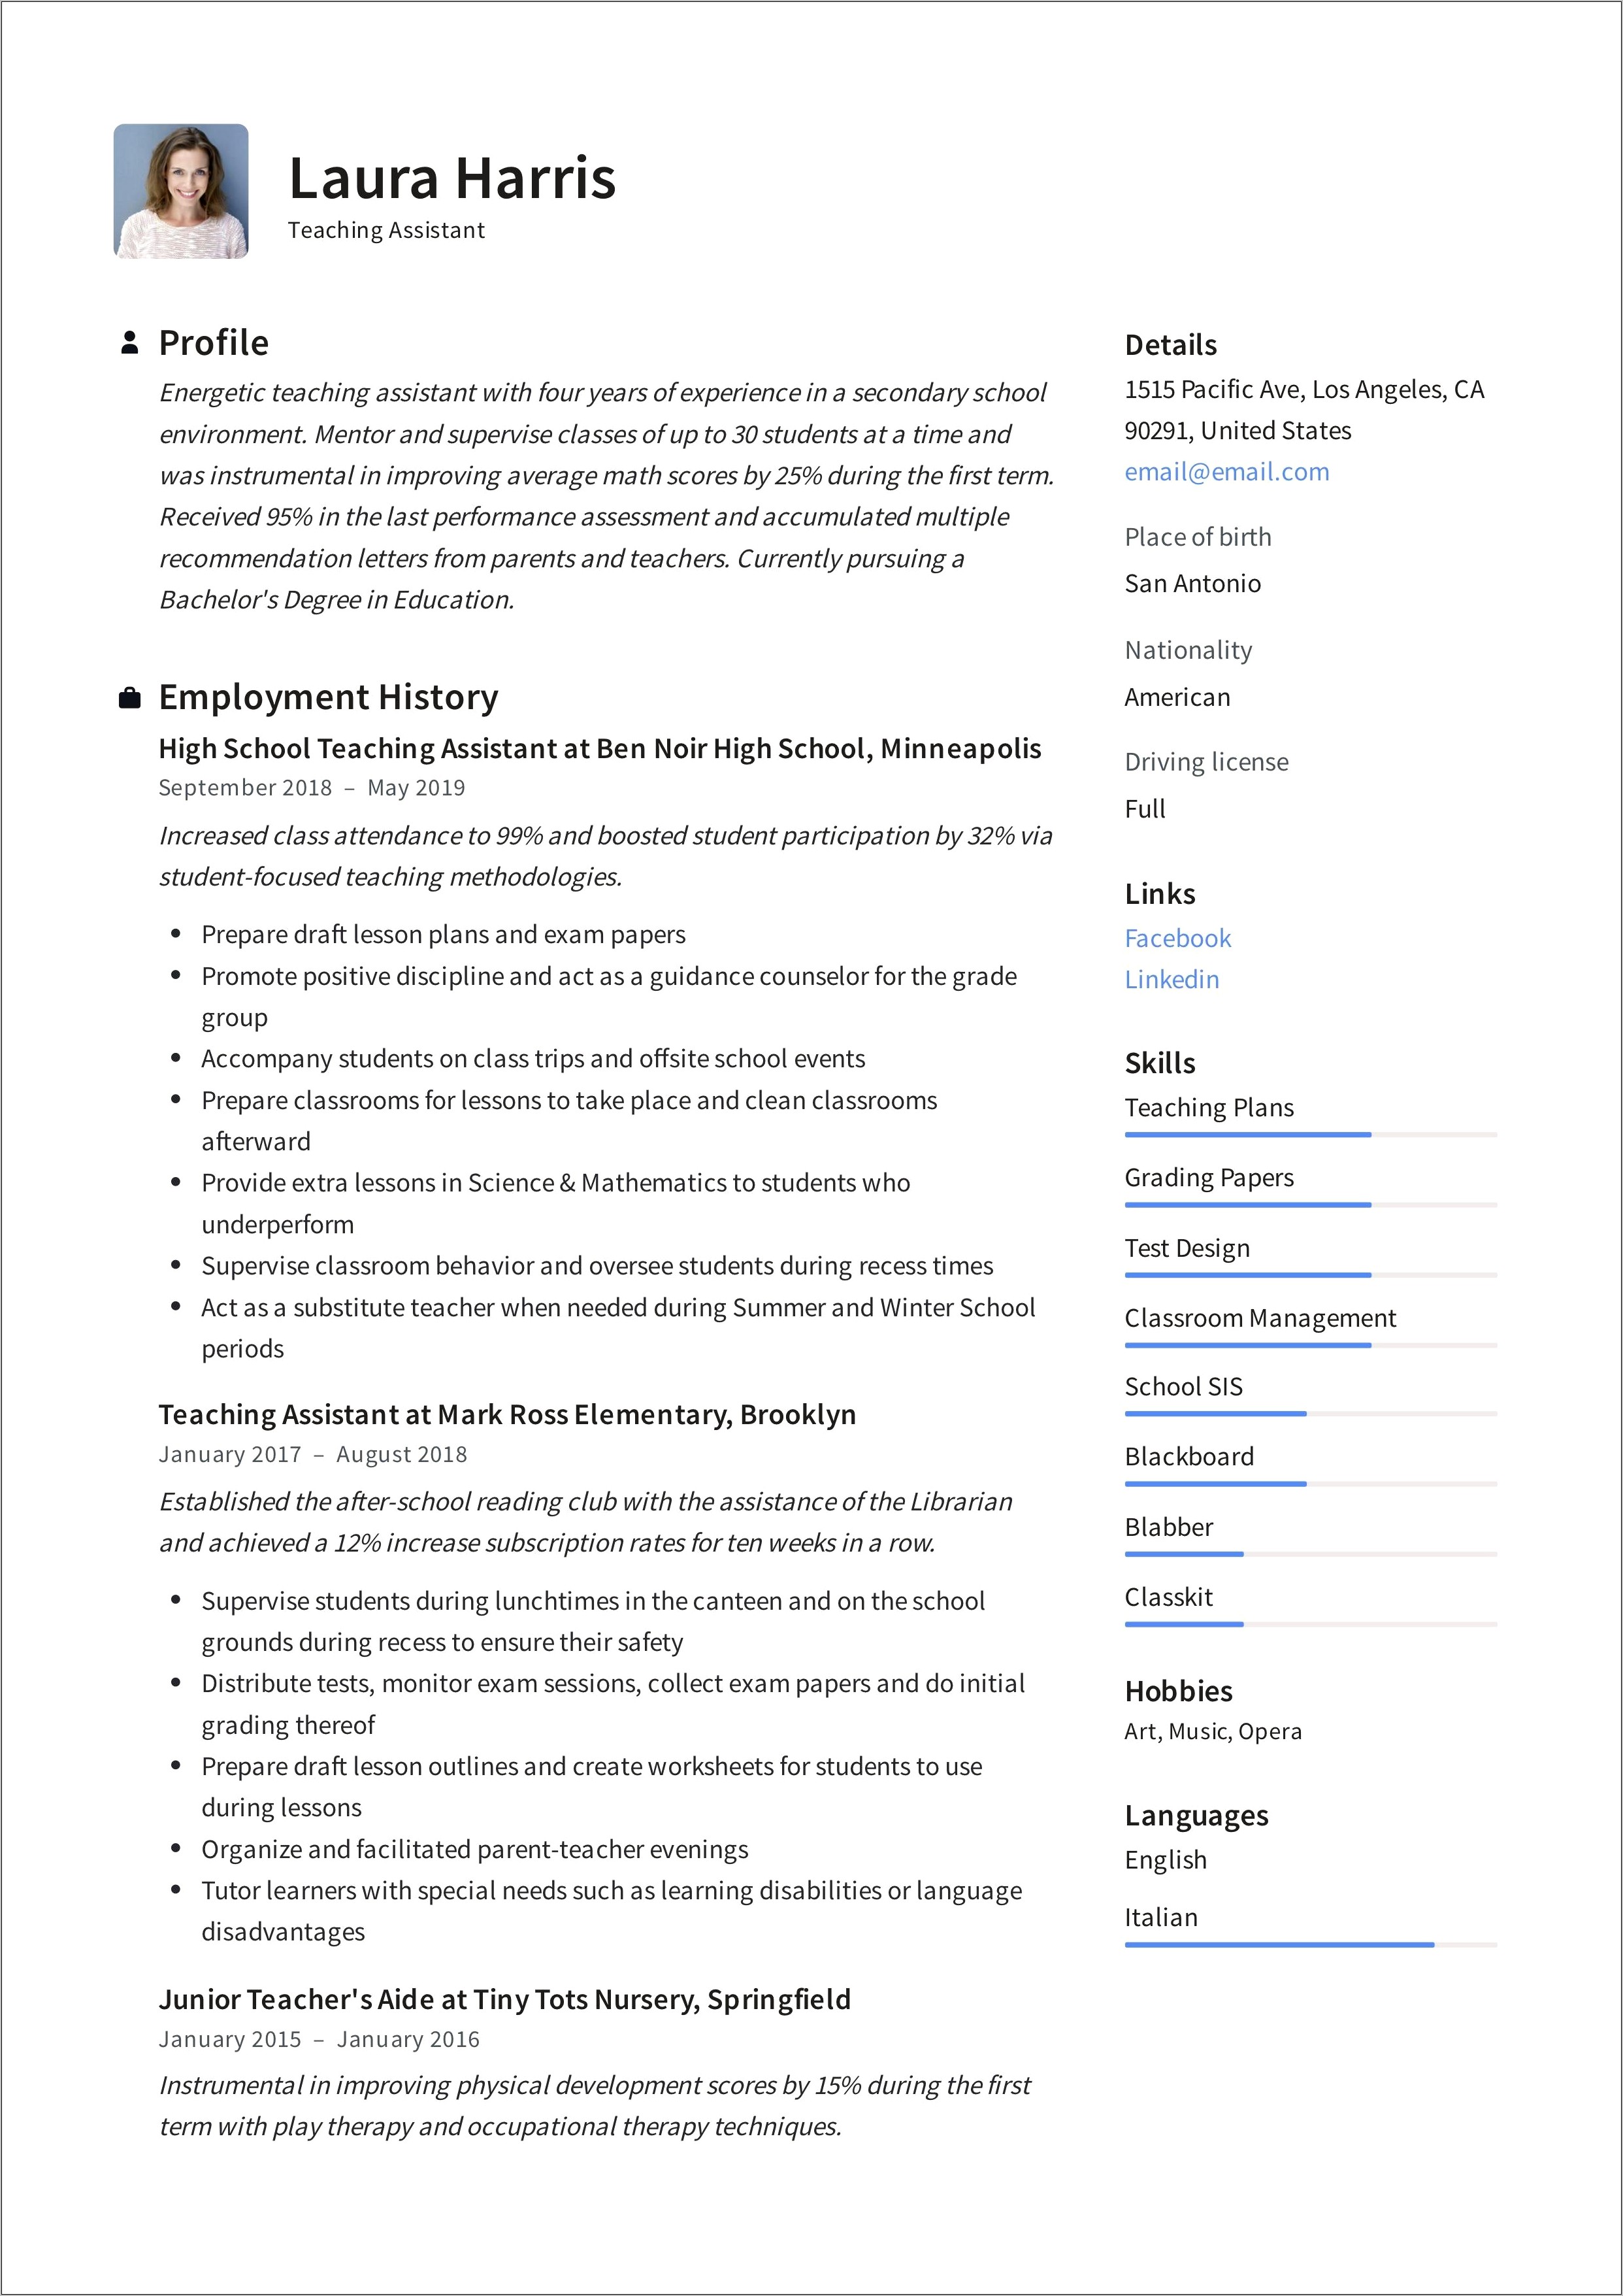 Resume Summary Examples For Education Admisitration